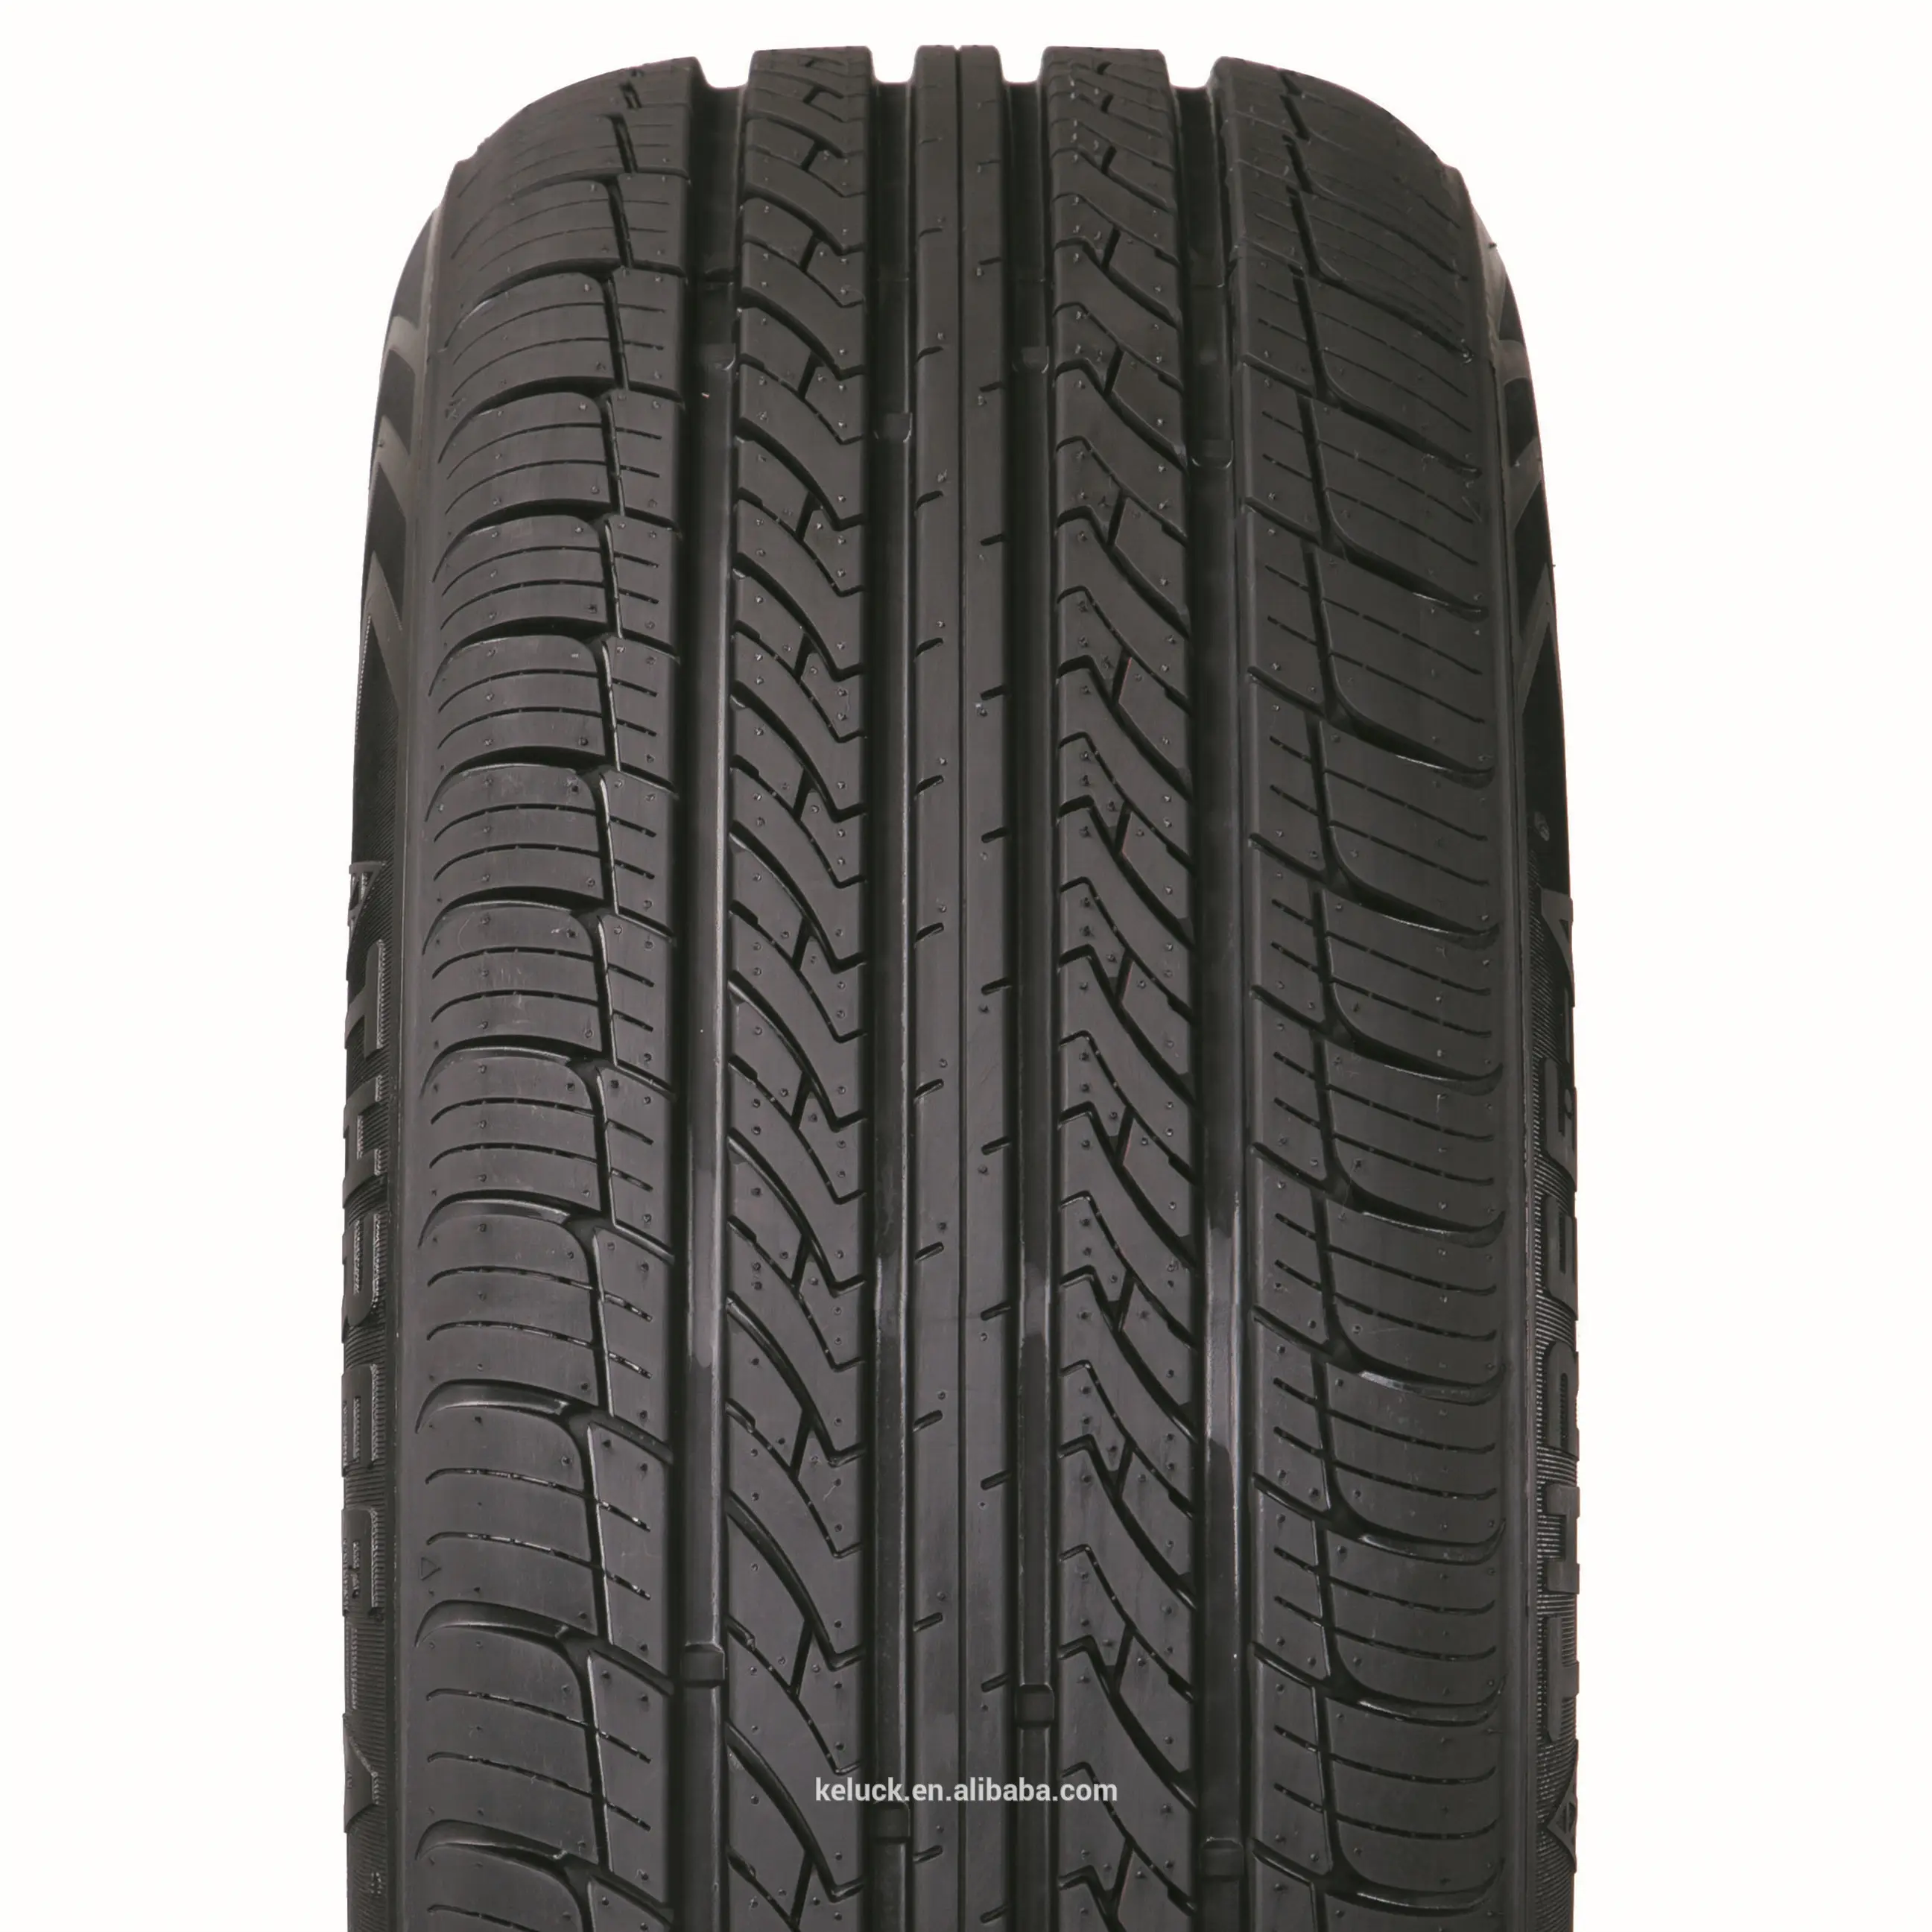 225/55R17 225 55 R 17 China factory cheaper price new tire for passenger vehicle car tires